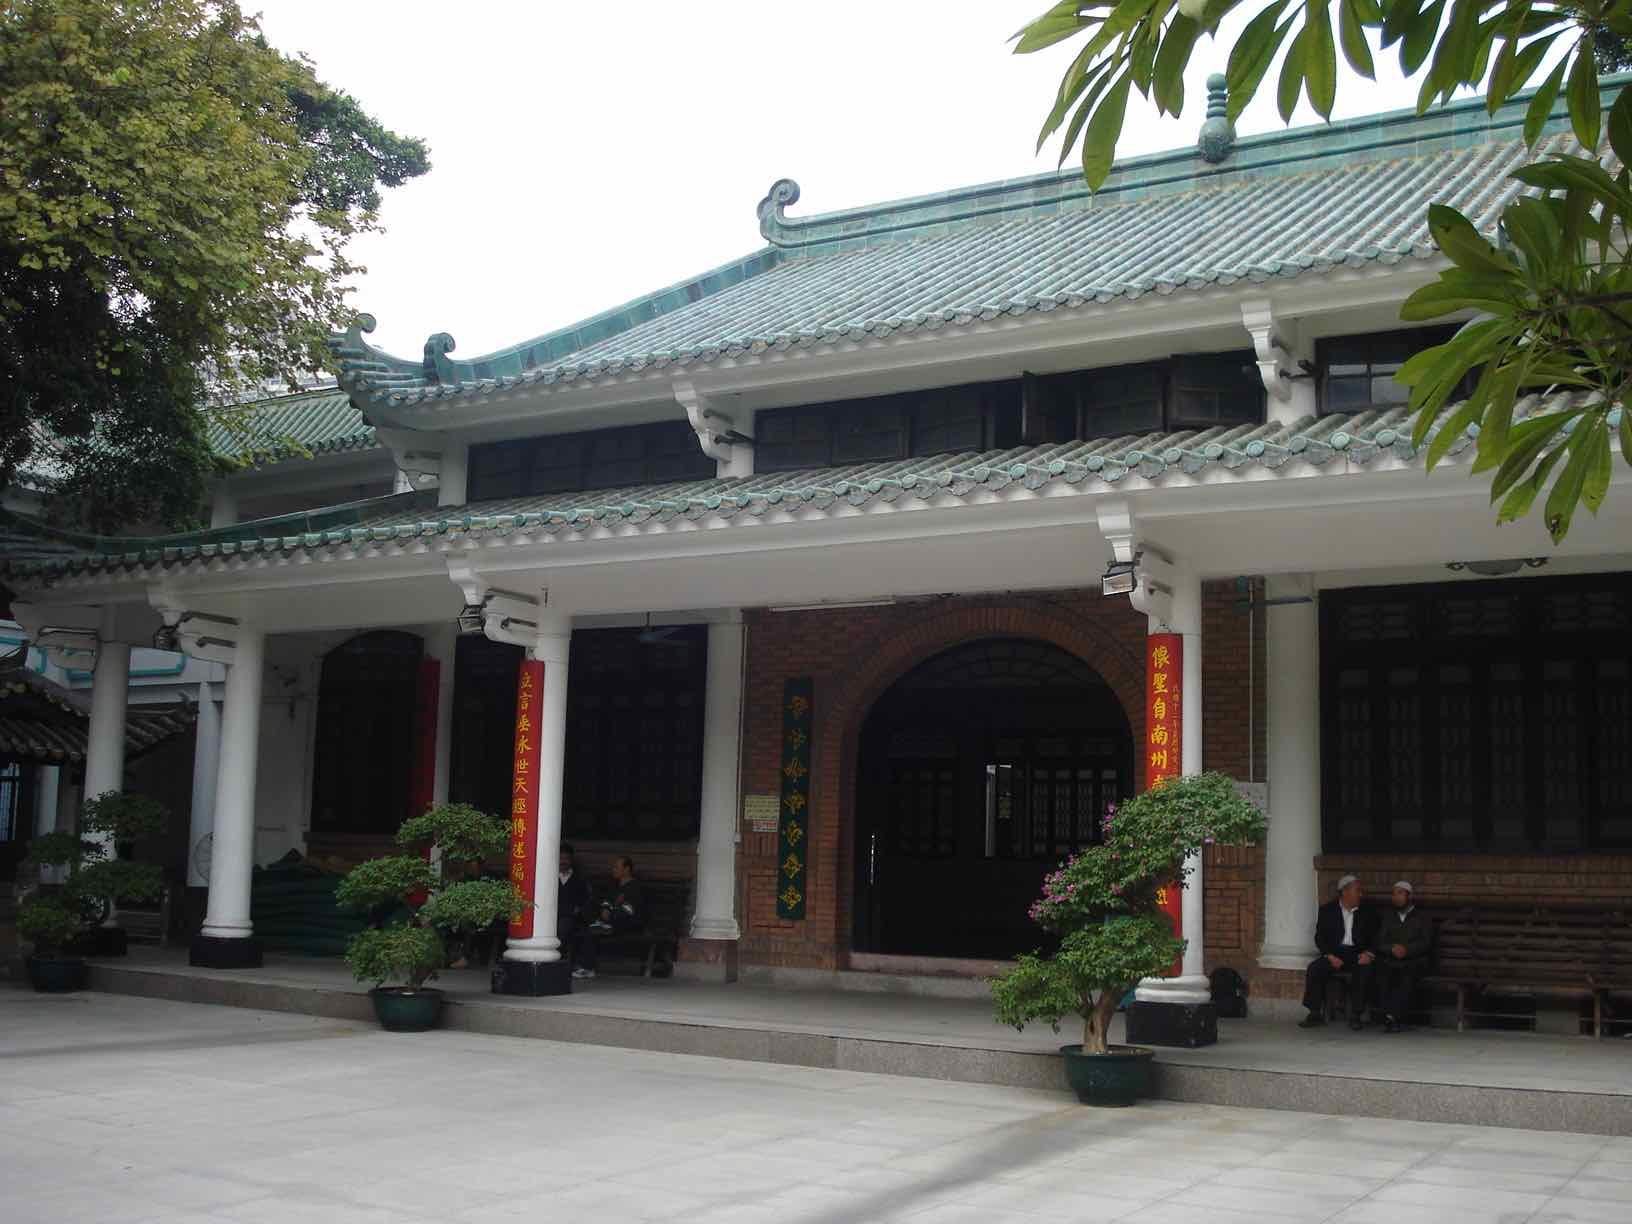 The Huaisheng is believe to be one of the oldest mosques in the world. 